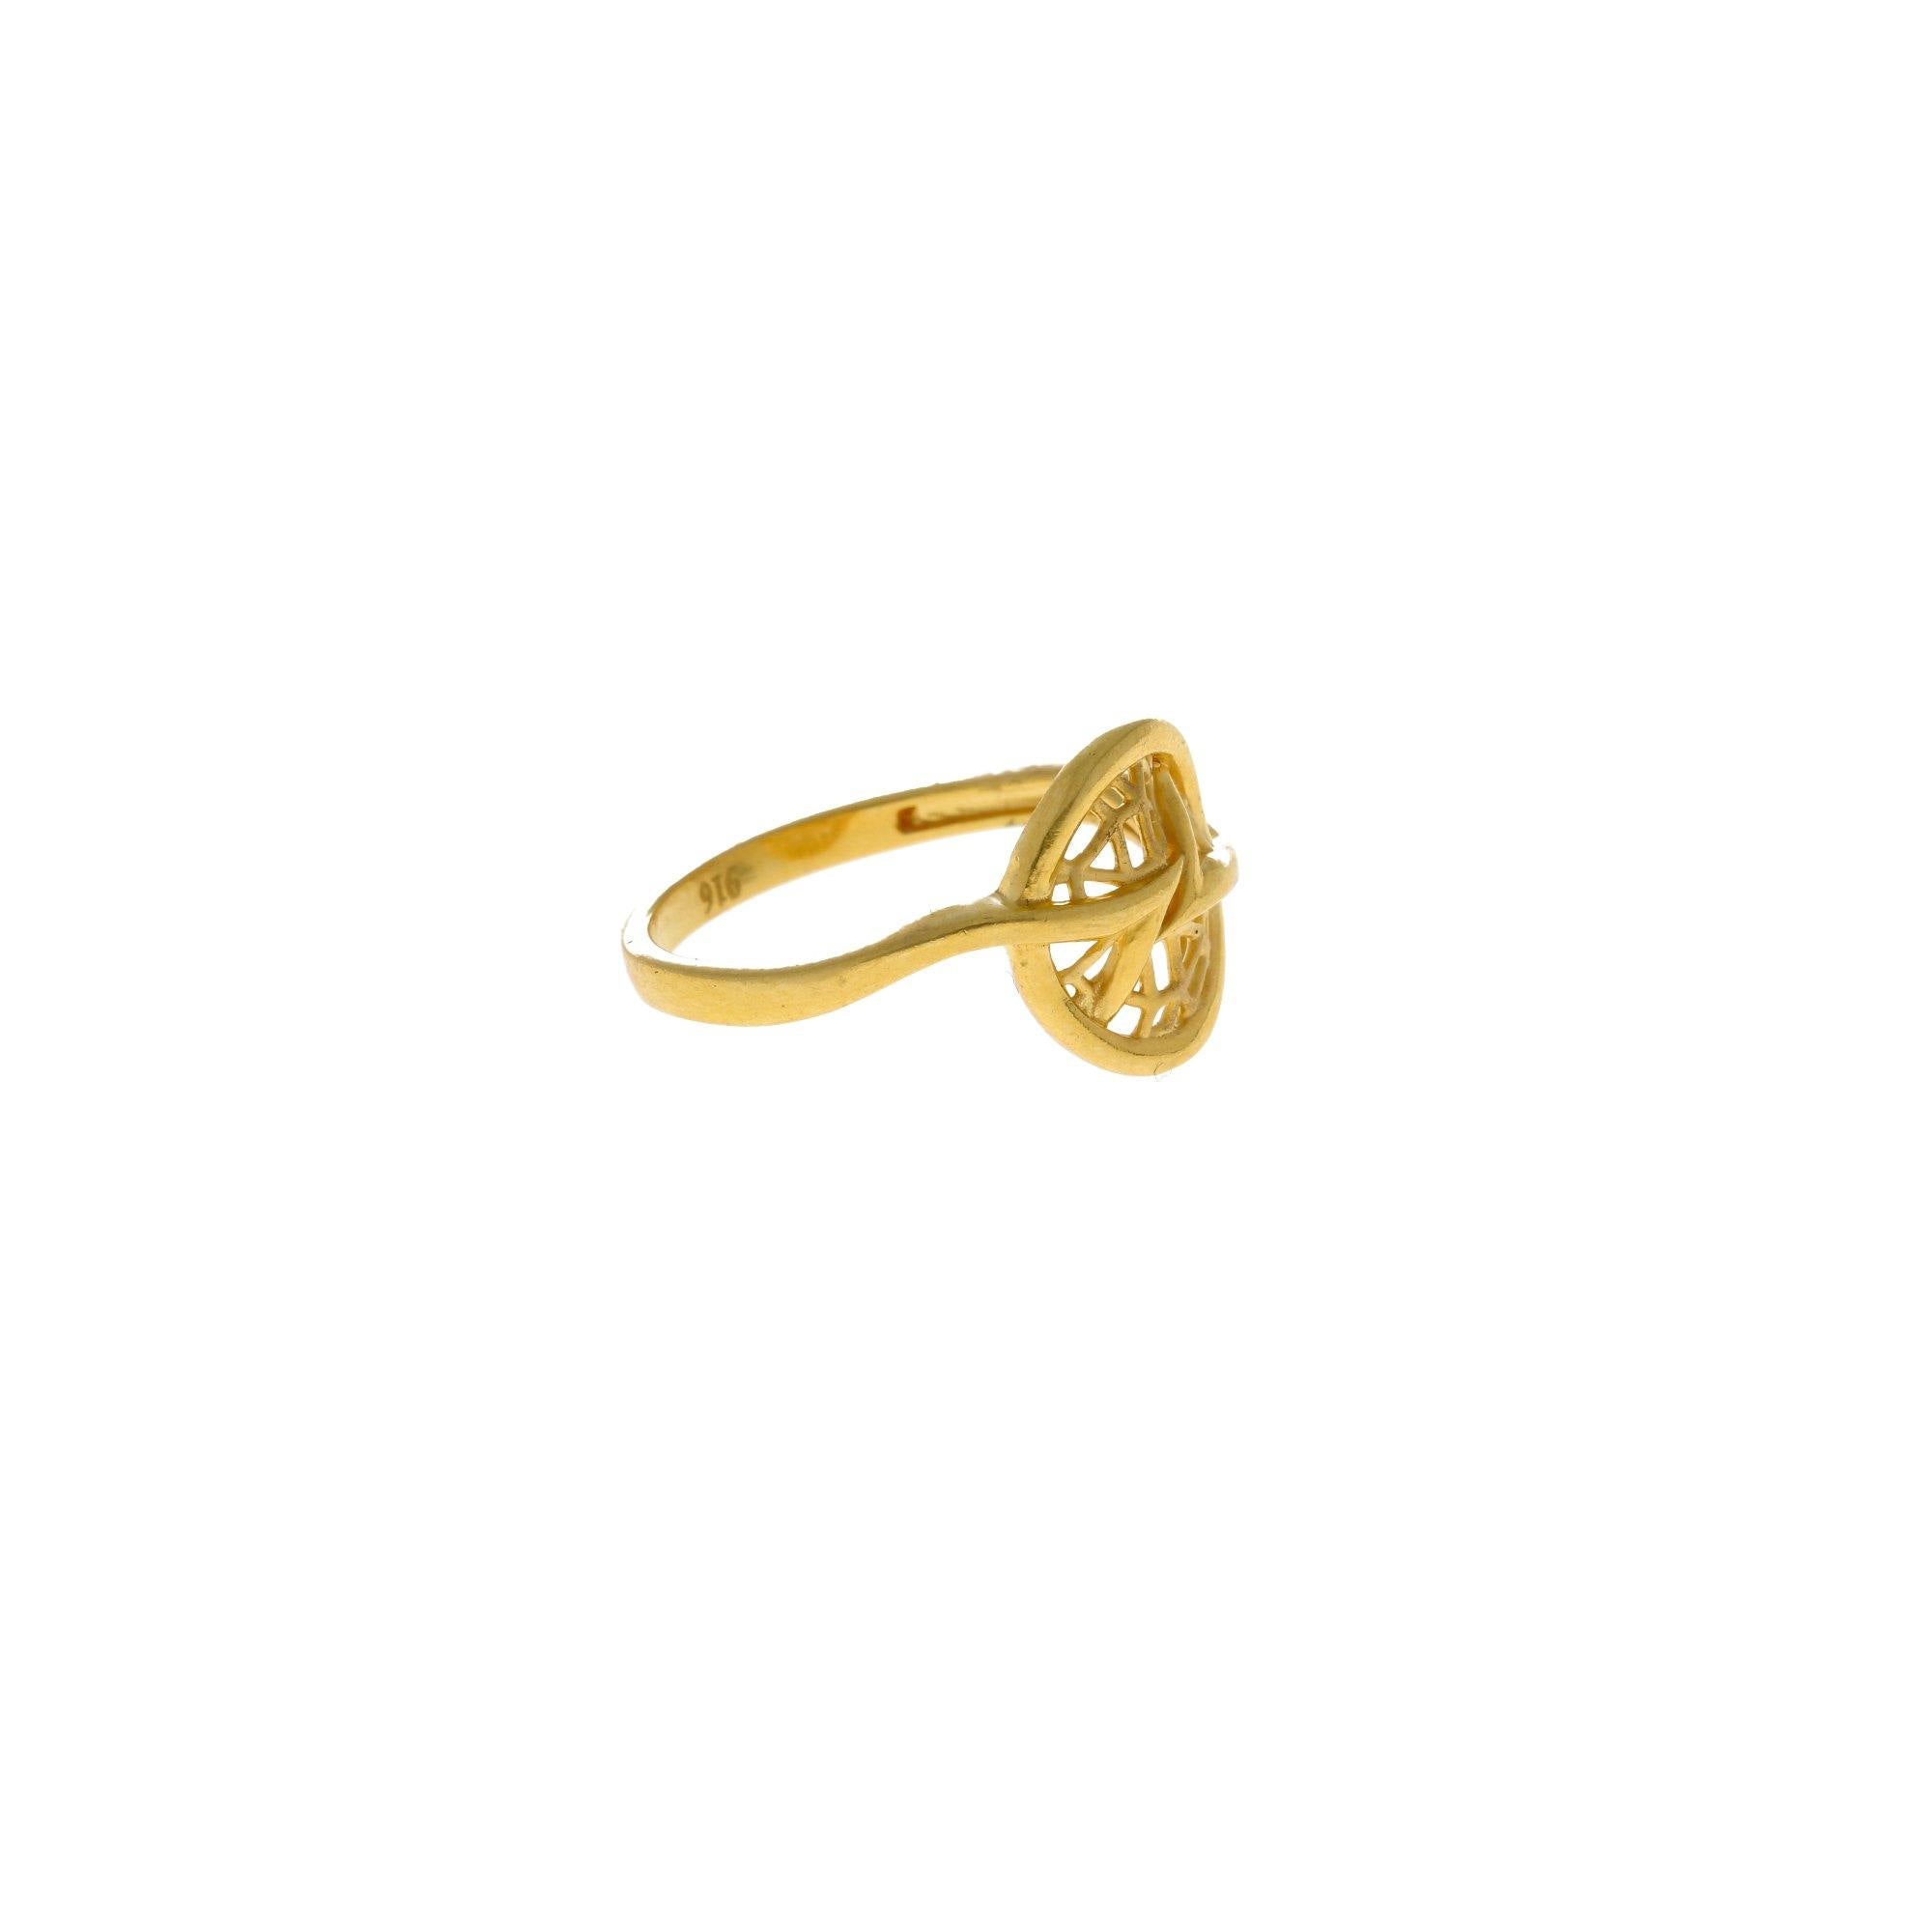 Floral Silicone Ring, Engraved with Gold Inlay | Knot Theory